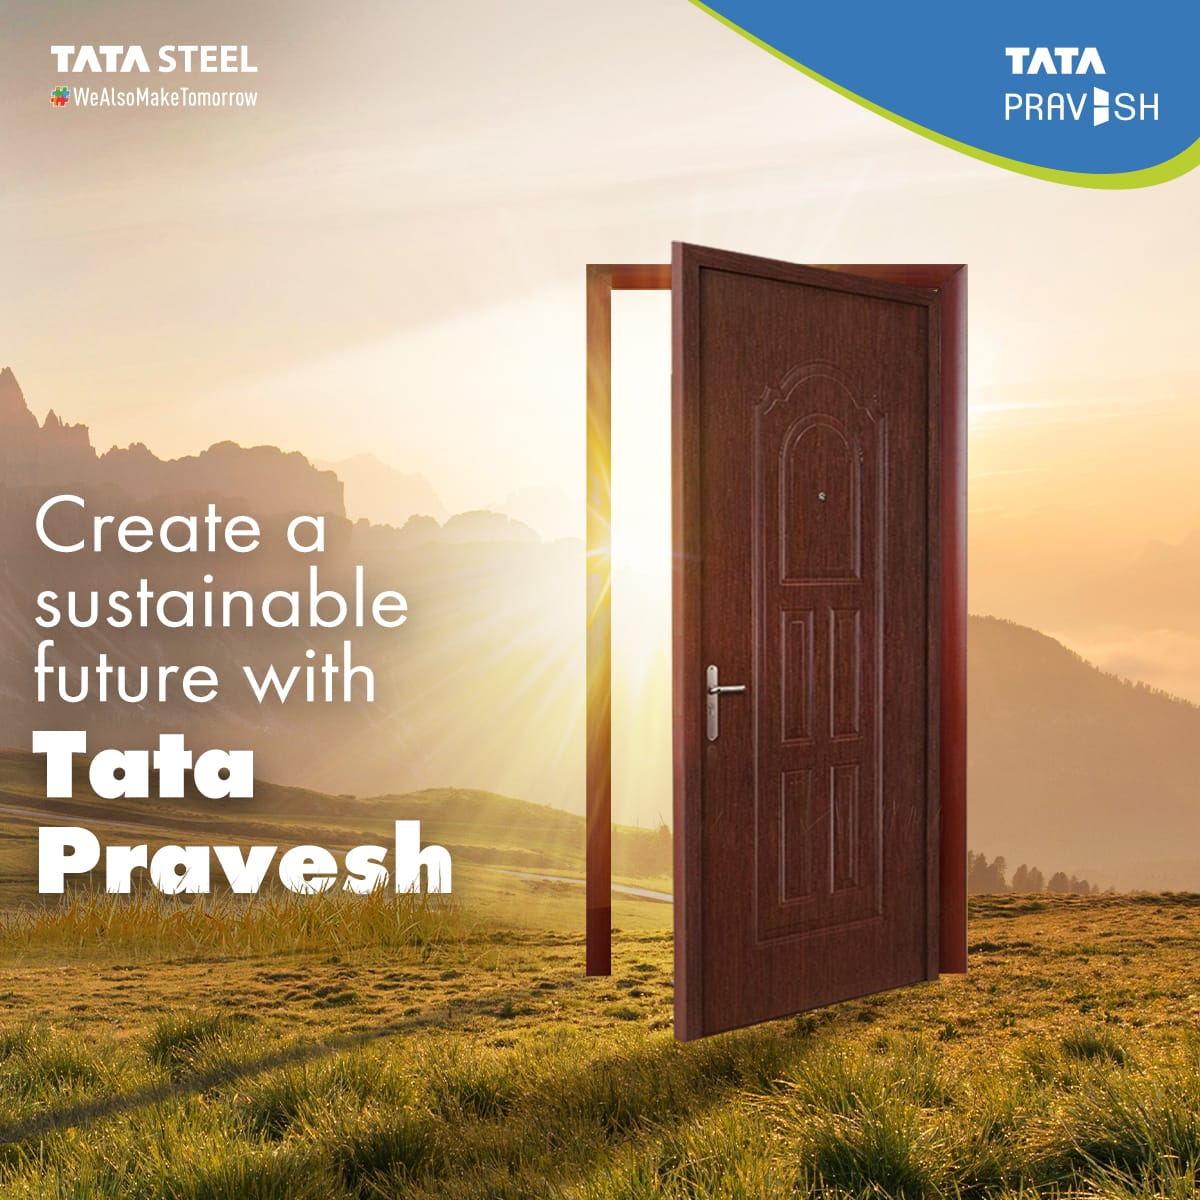 Together, let's build homes that not only stand the test of time but also contribute to a greener, more eco-conscious world. 

Join us in making a lasting difference.
.
.
#TataPravesh #AkelaHiKaafiHai #Safety #FireSafeDoors #TataPraveshDoors #AHKH #SustainableLiving #GreenFuture